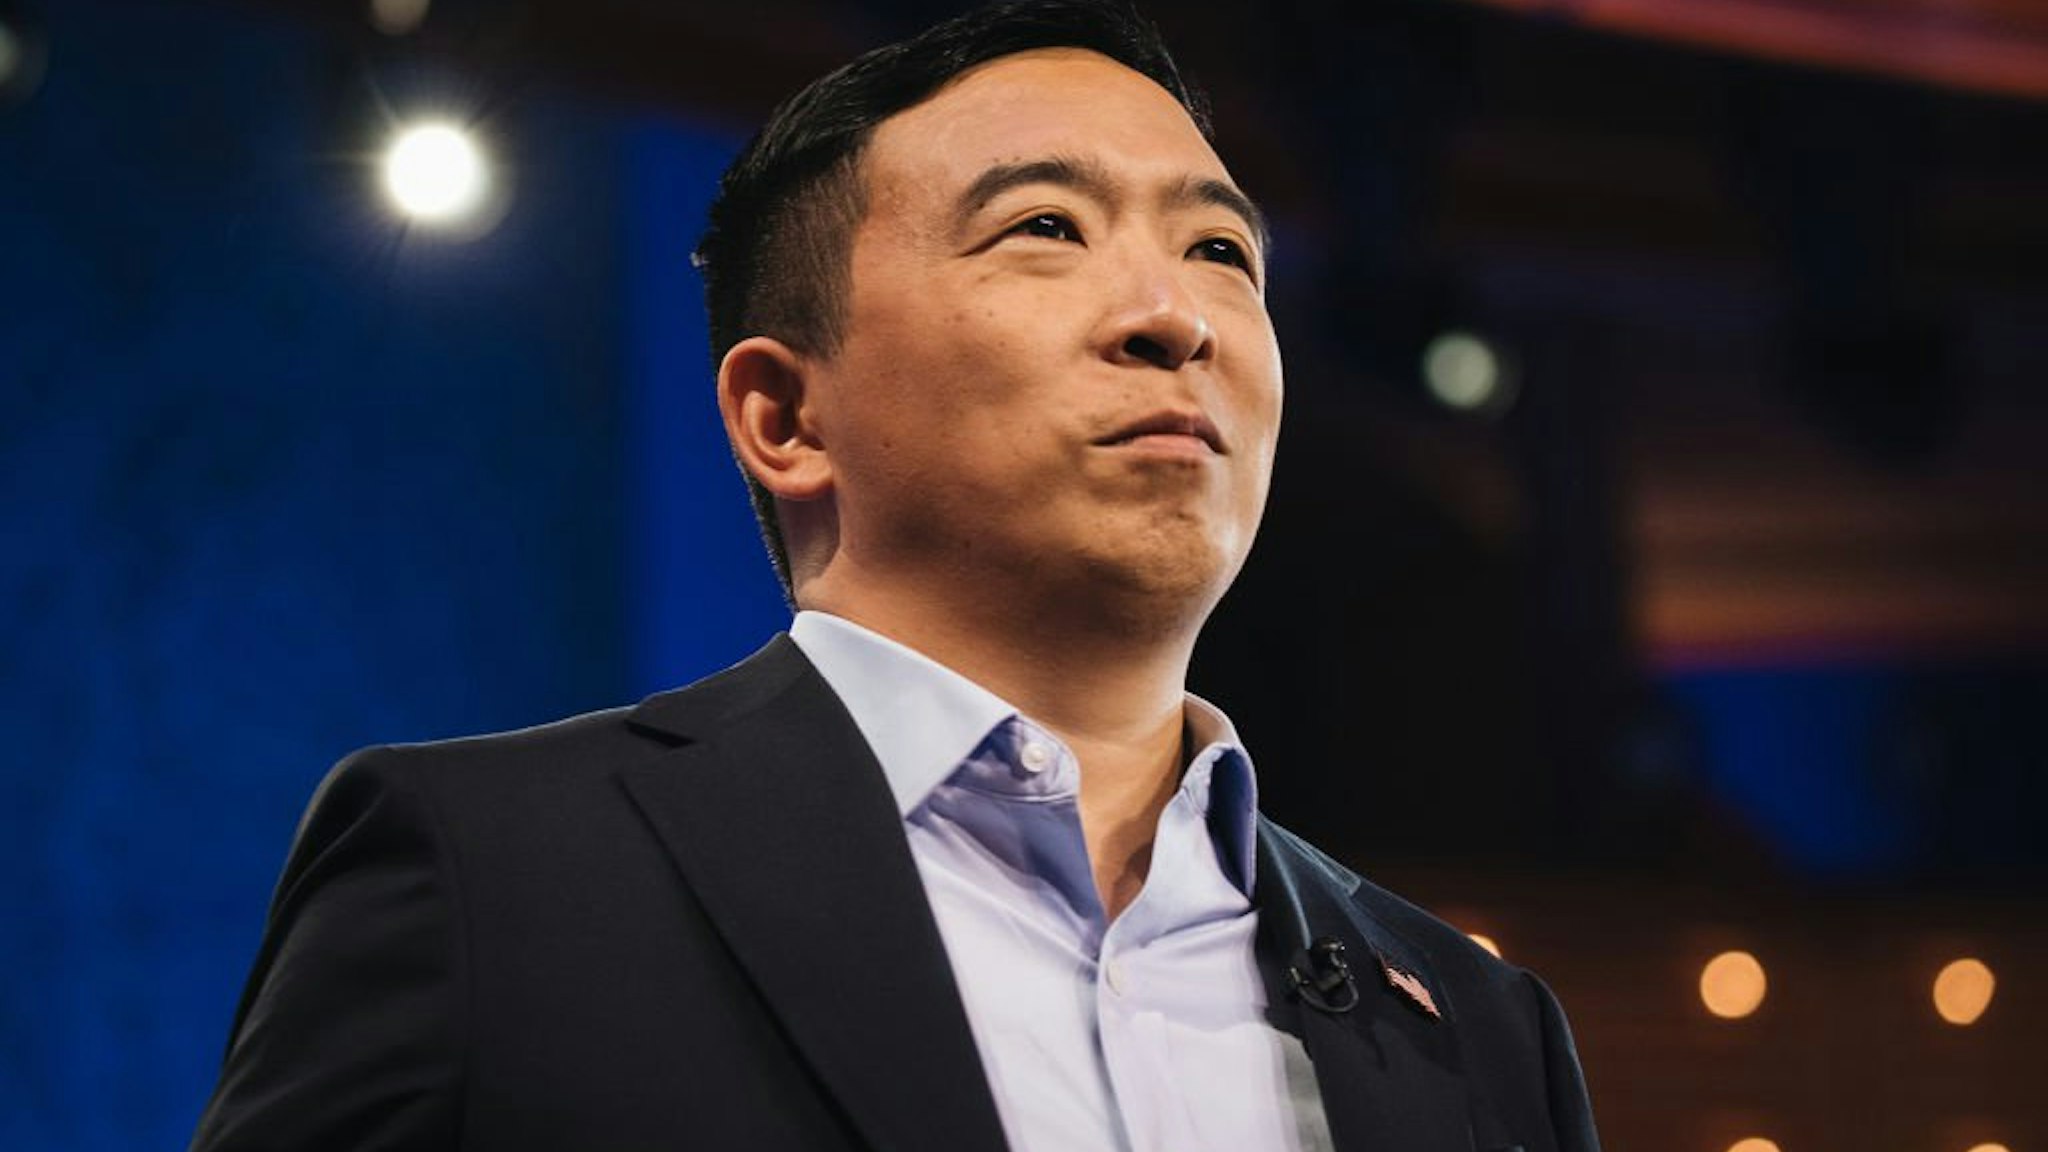 Andrew Yang, founder of Venture for America stands on stage during the Democratic presidential candidate debate